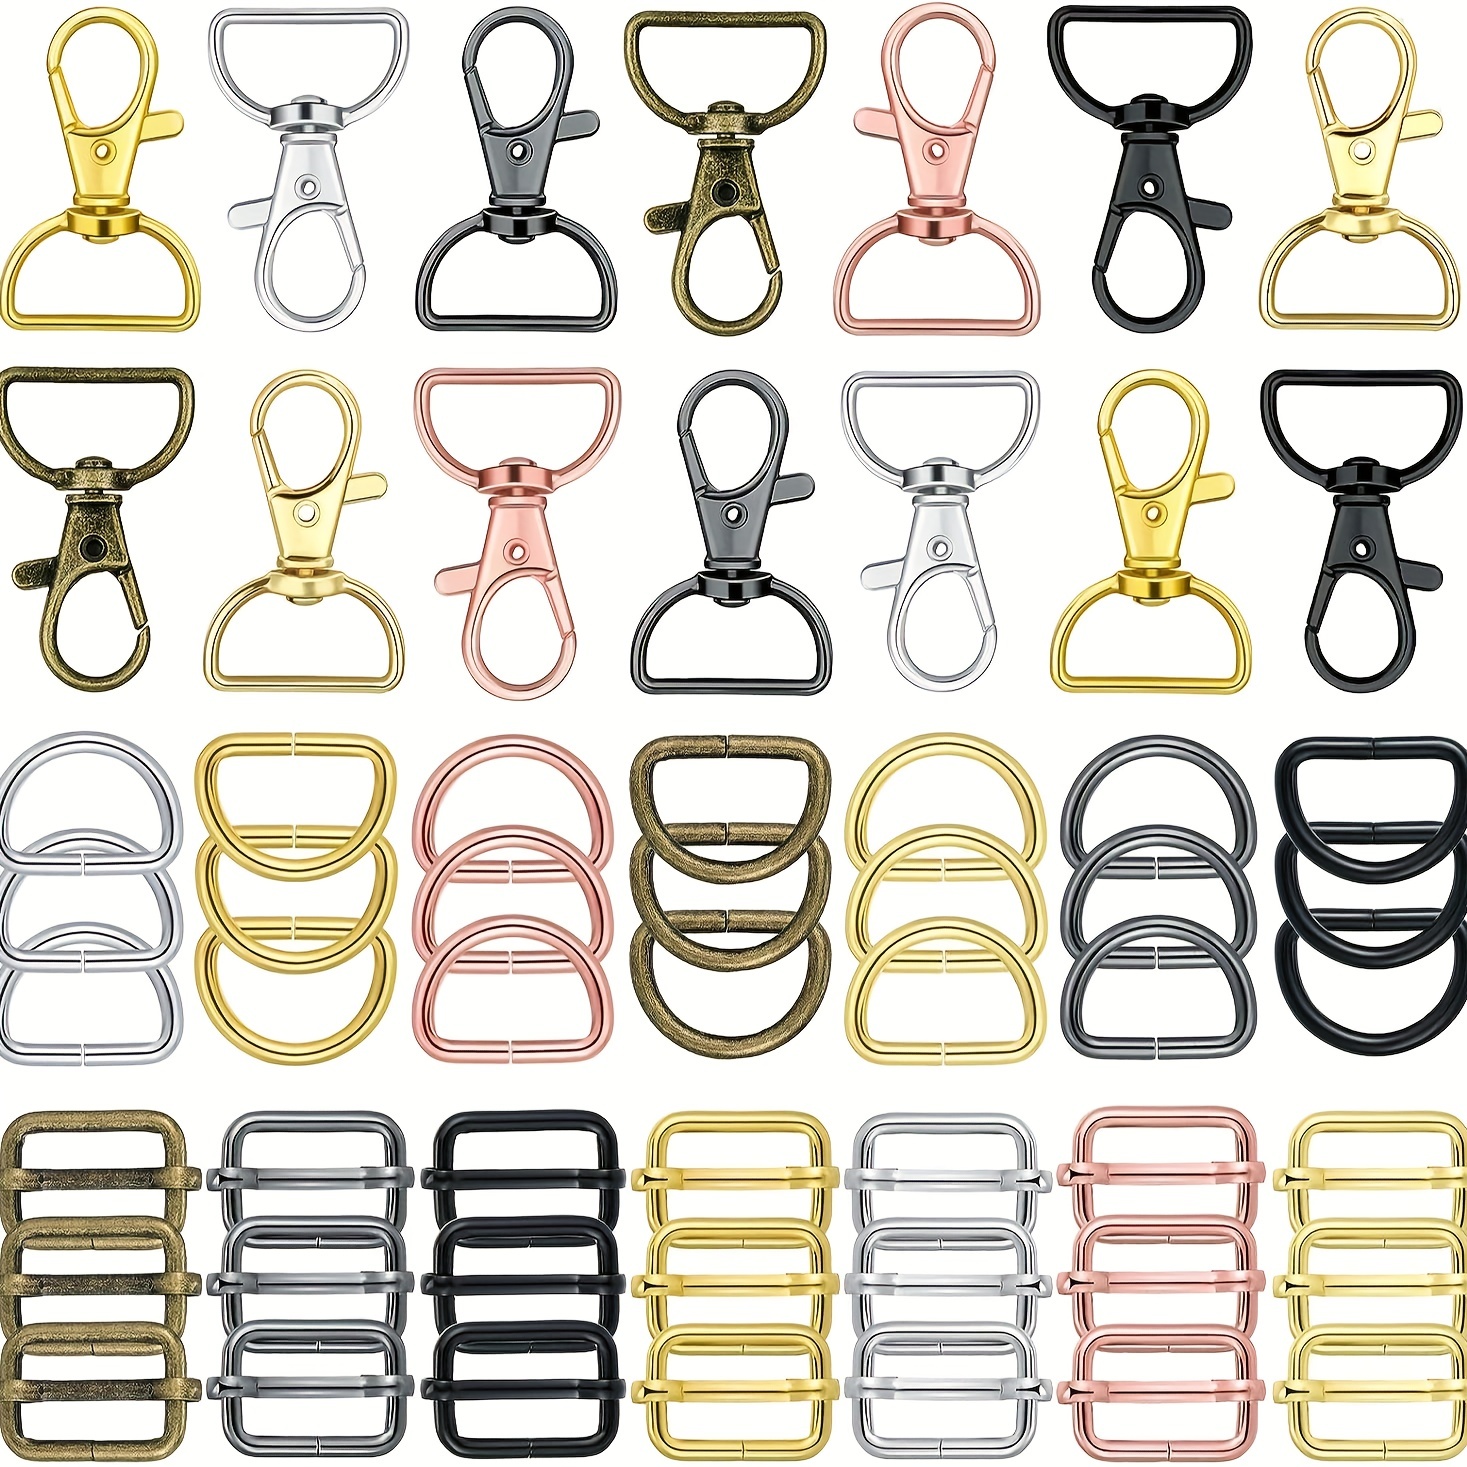 

56pcs Colorful Zinc Alloy Rotating Lobster Clasp D-type Color Keyring Sliding Buckle For Diy Keychain Luggage Hardware Accessories Small Business Supplies, Golden Diy